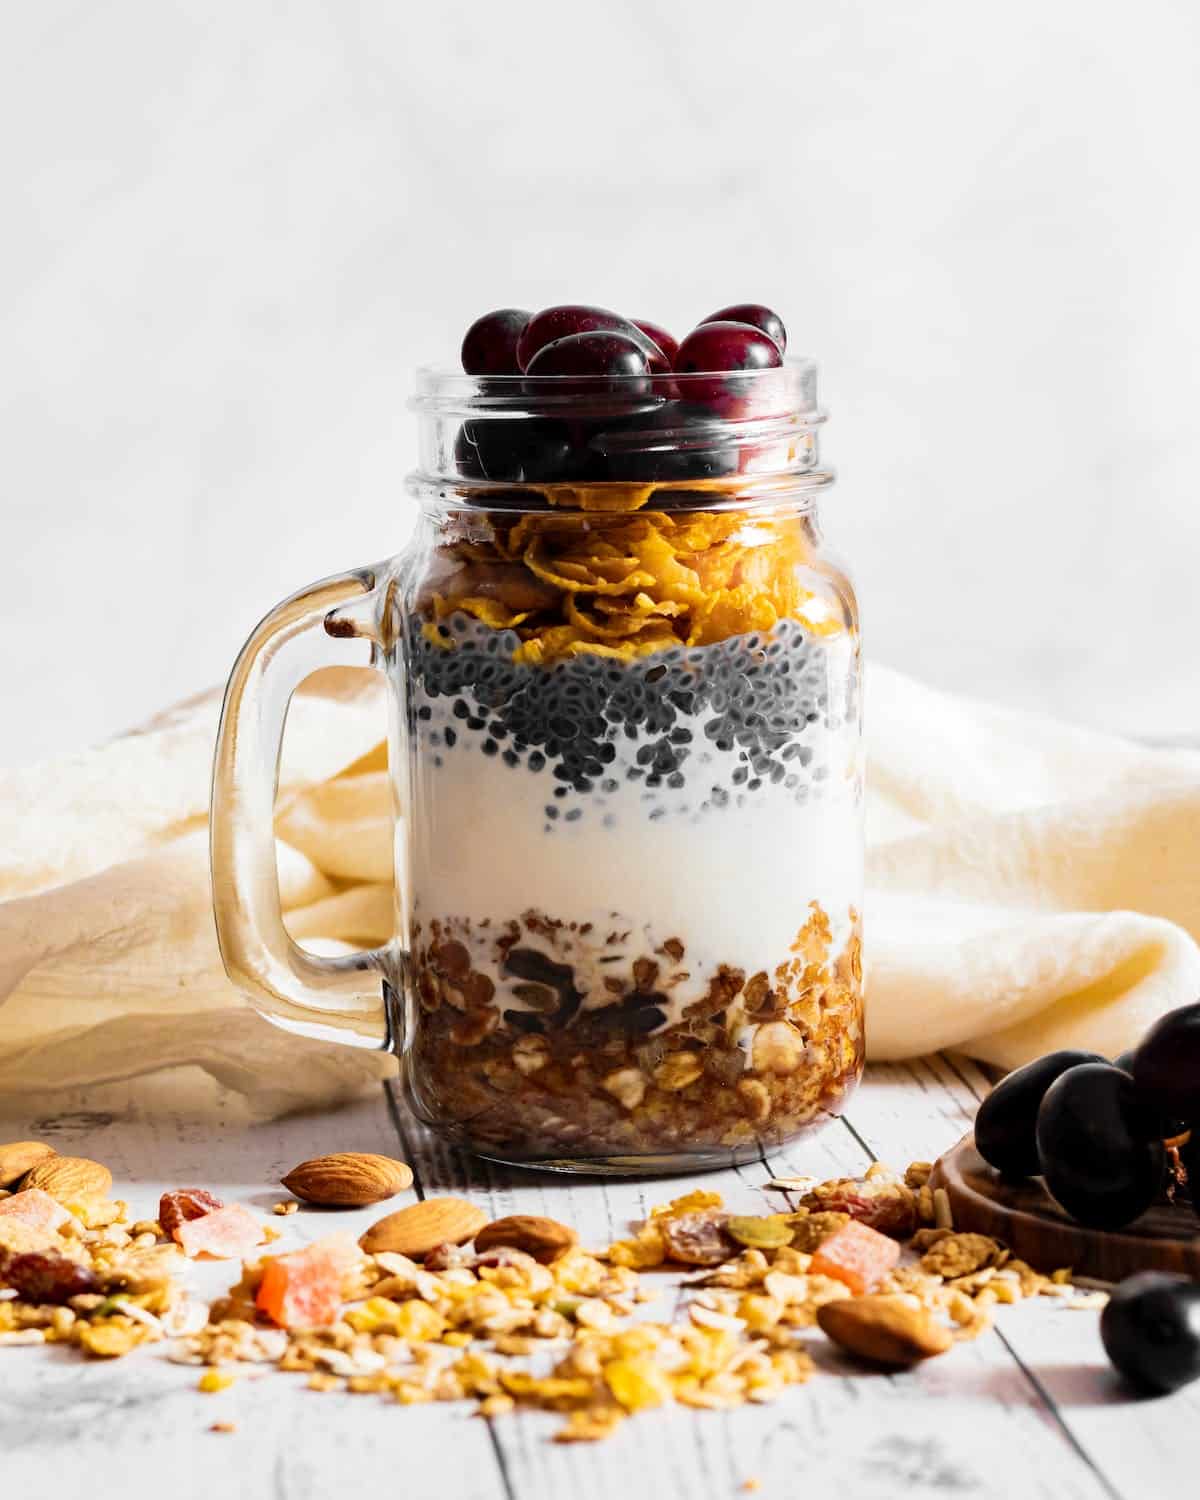 Granola vs. Muesli: What are the Differences? - My Captain Oats